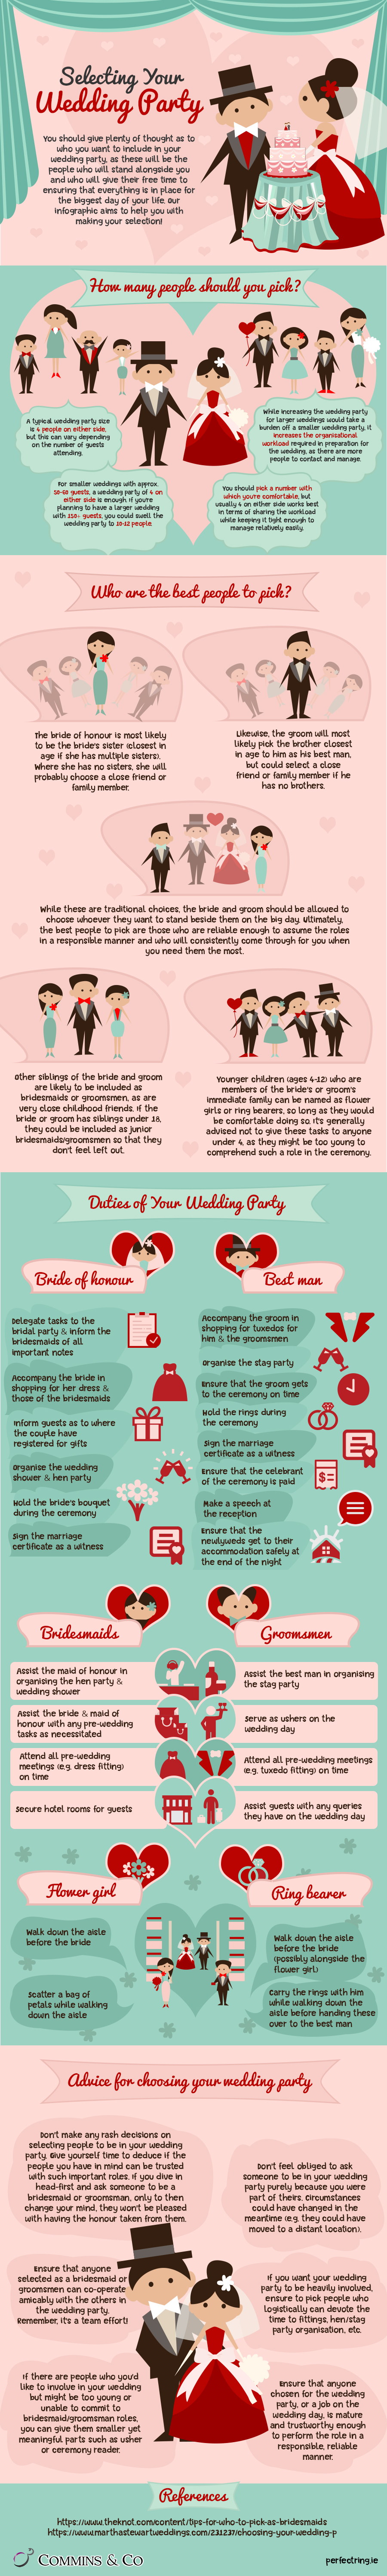 How to Choose a Wedding Party You'll Love | House Estate